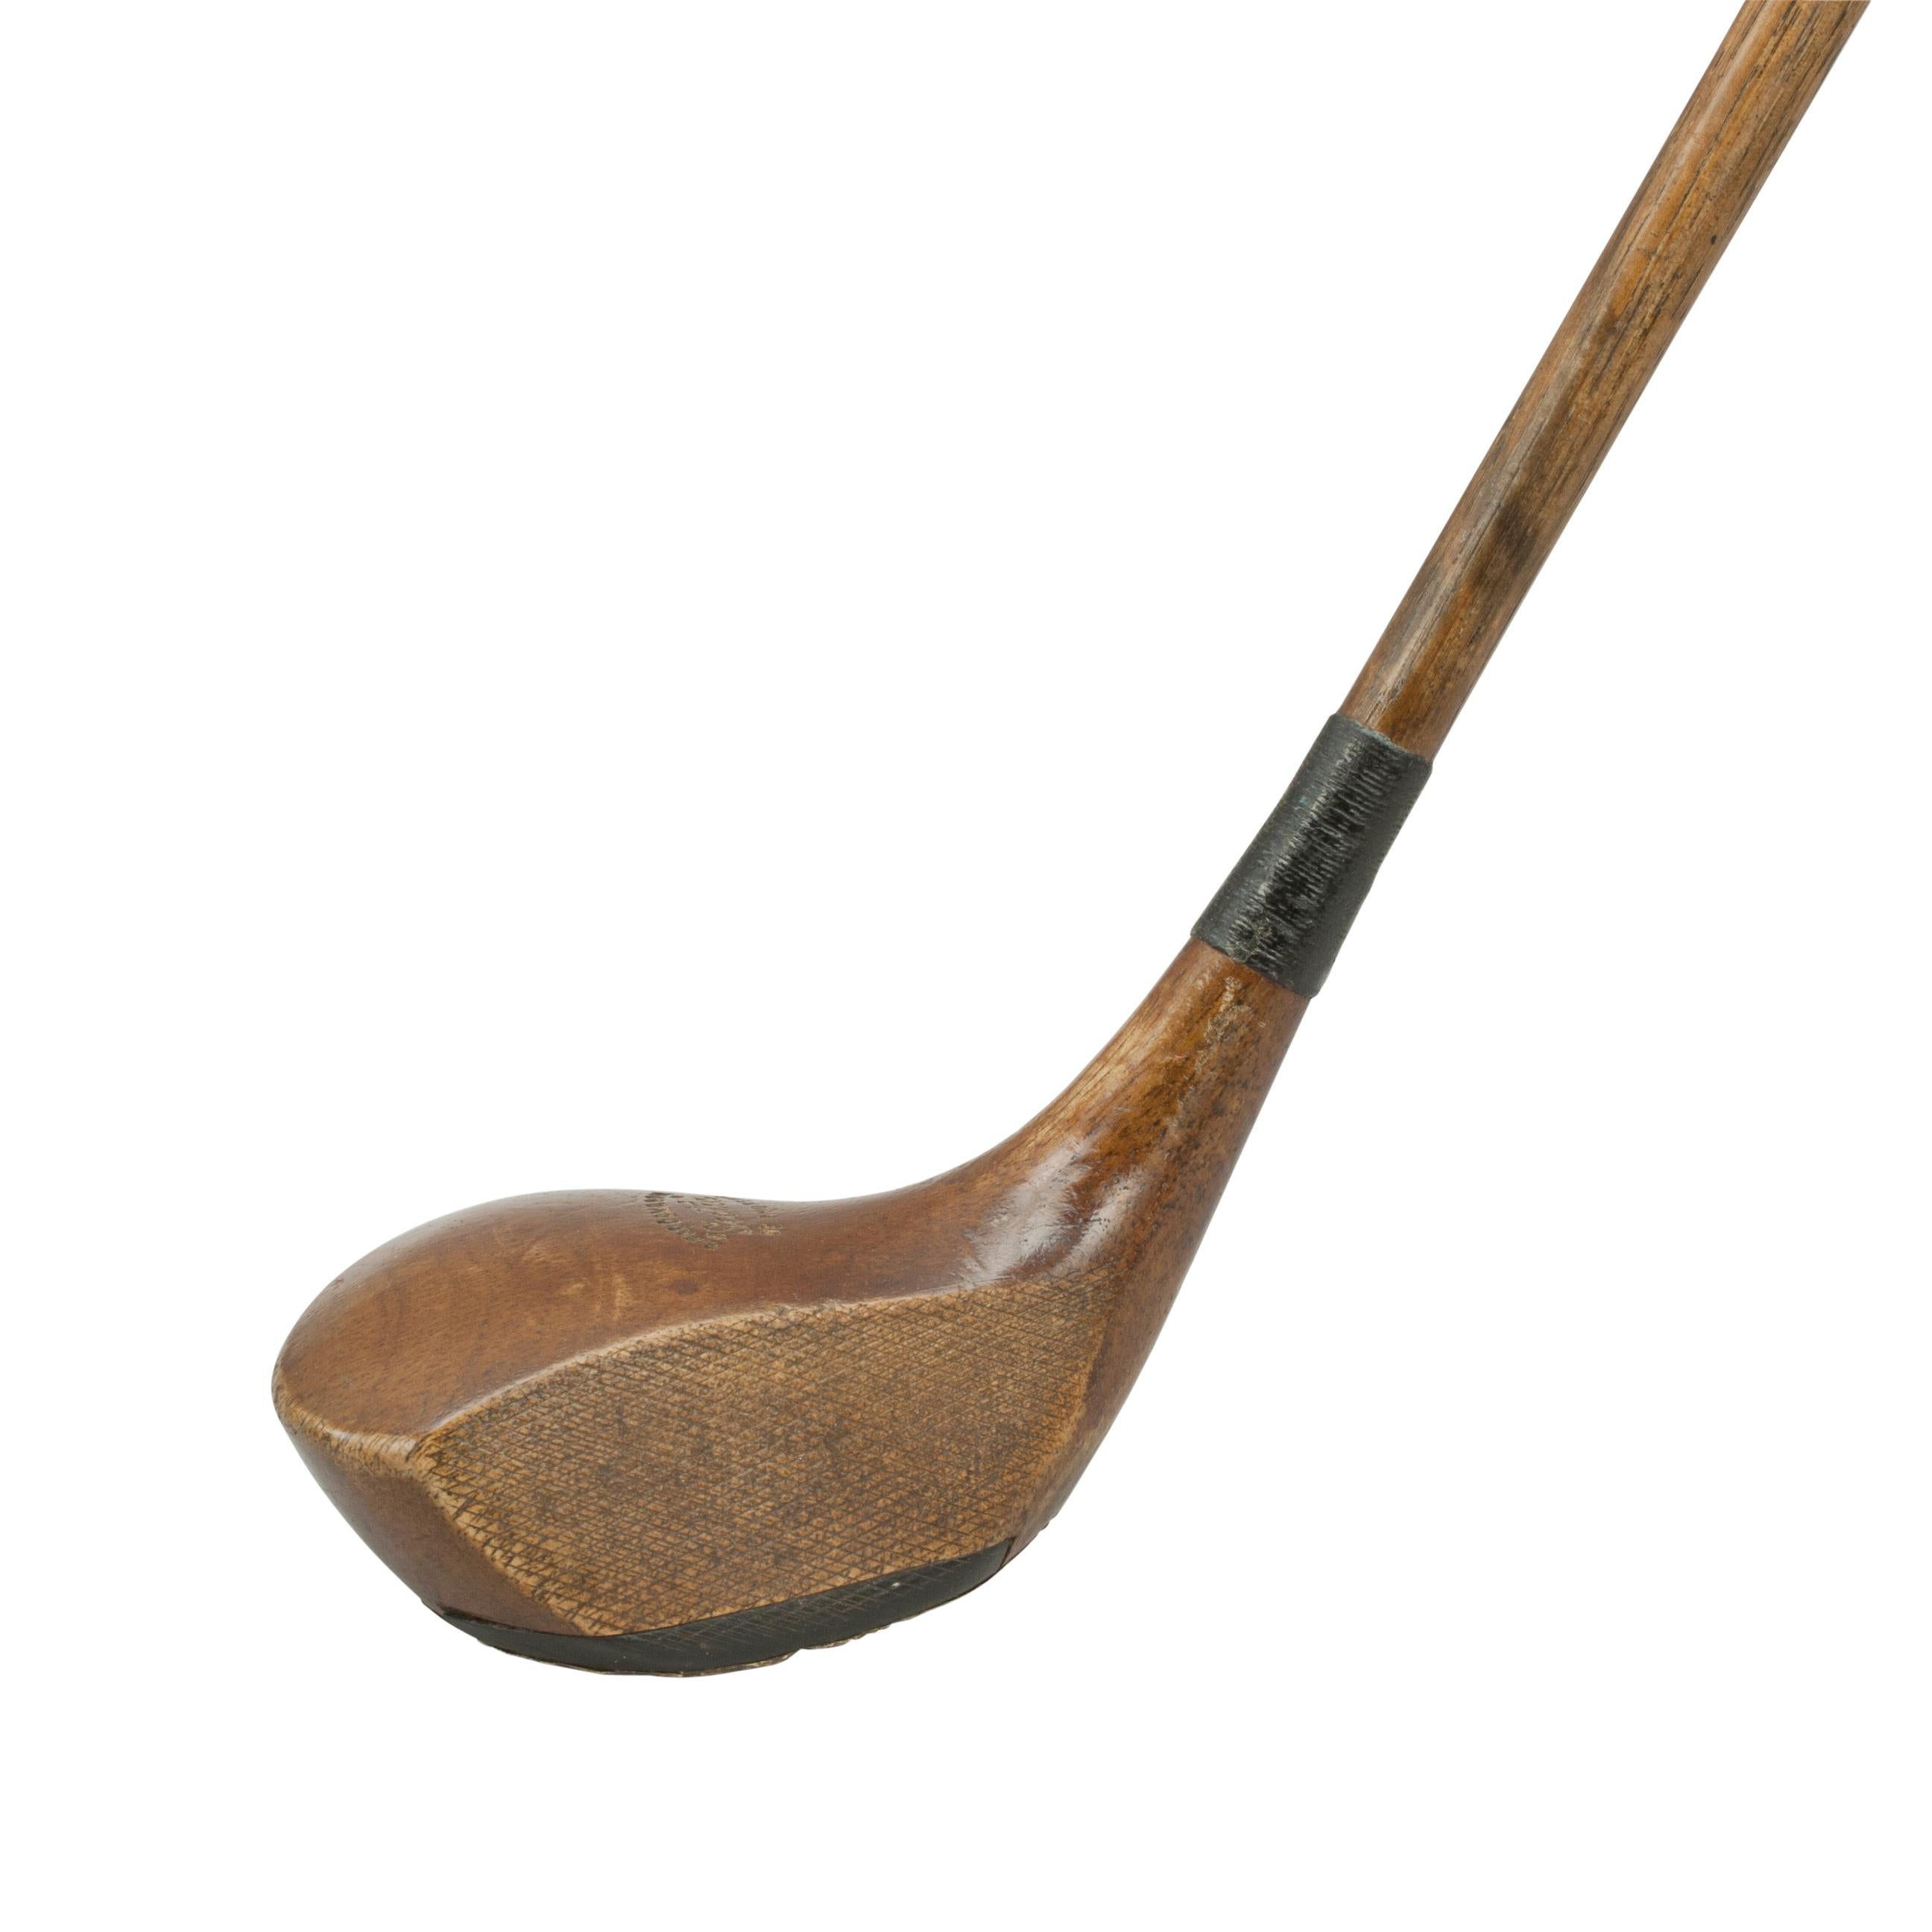 Robert Forgan Brassie Golf Club.
A good persimmon wood 'Scotia' branded hickory shafted brassie or spoon by Robert Forgan & Son of St Andrews. The club head and shaft marked with Forgan's details the crown of the club head also stamped 'Scotia'.